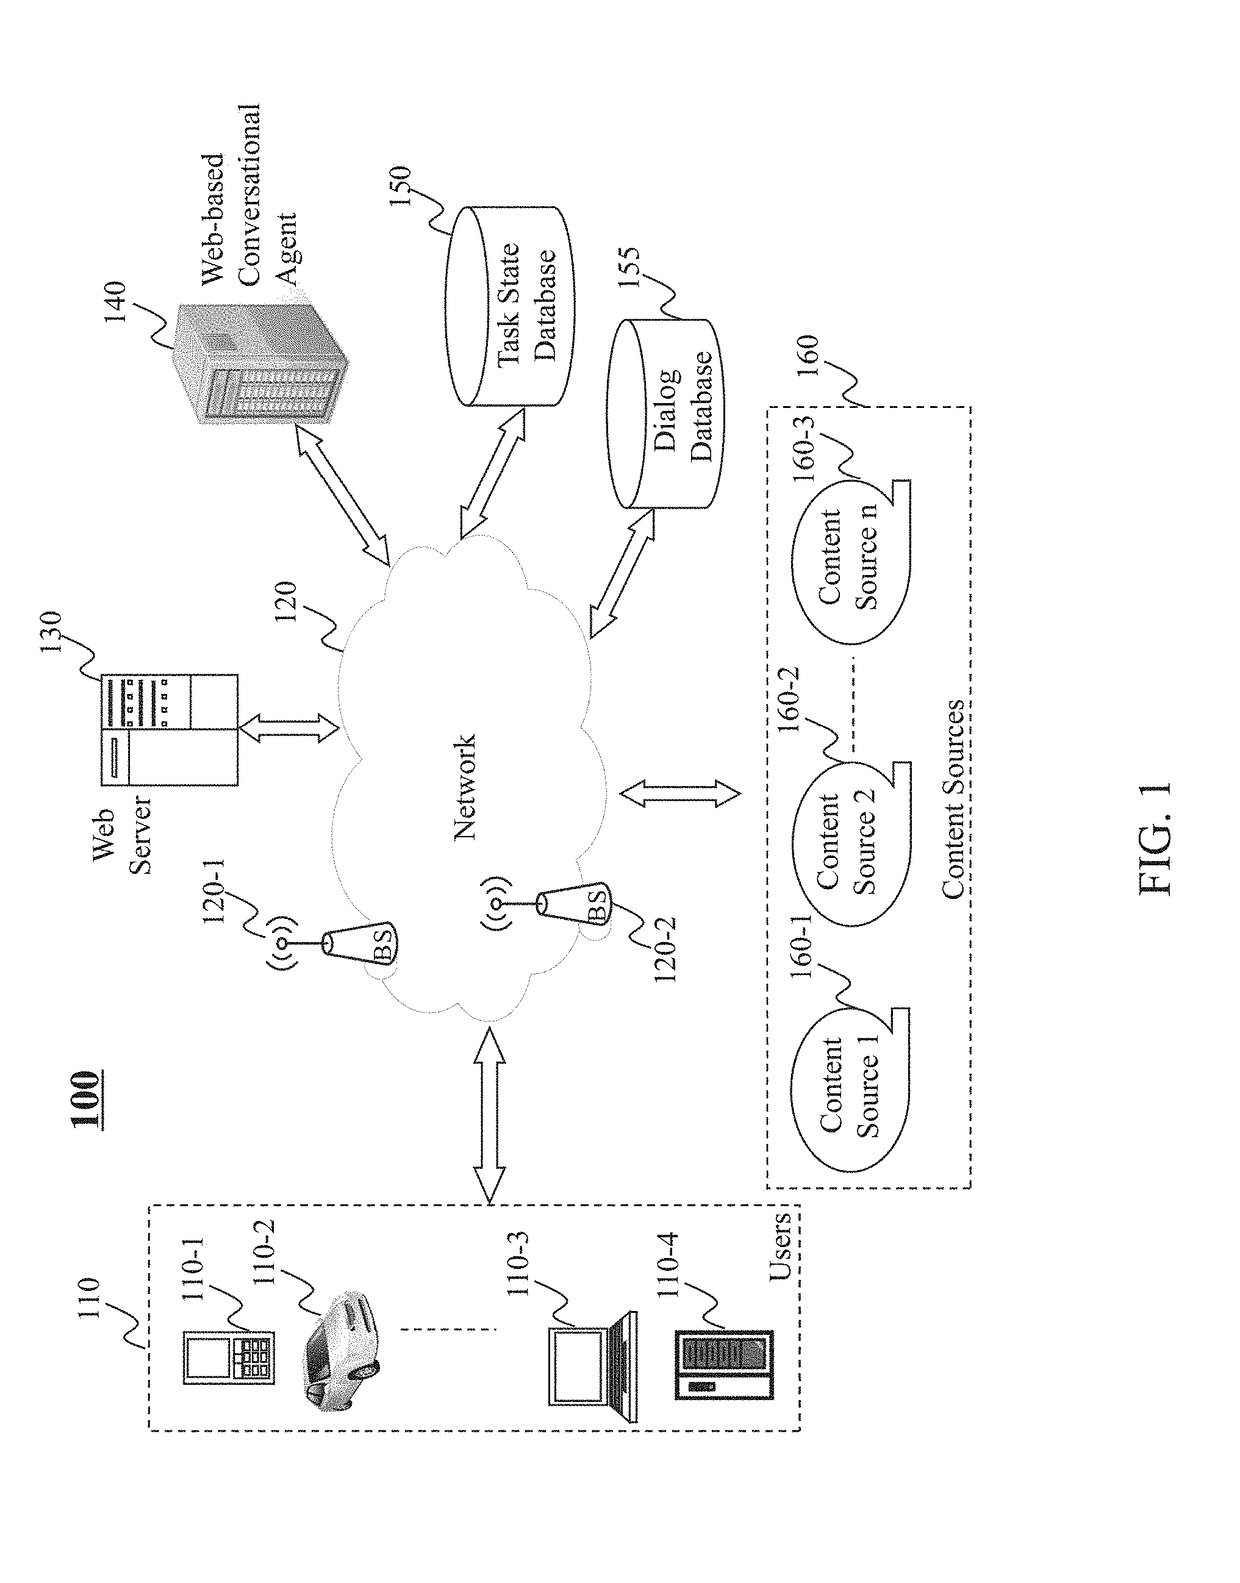 Method and system for facilitating a guided dialog between a user and a conversational agent